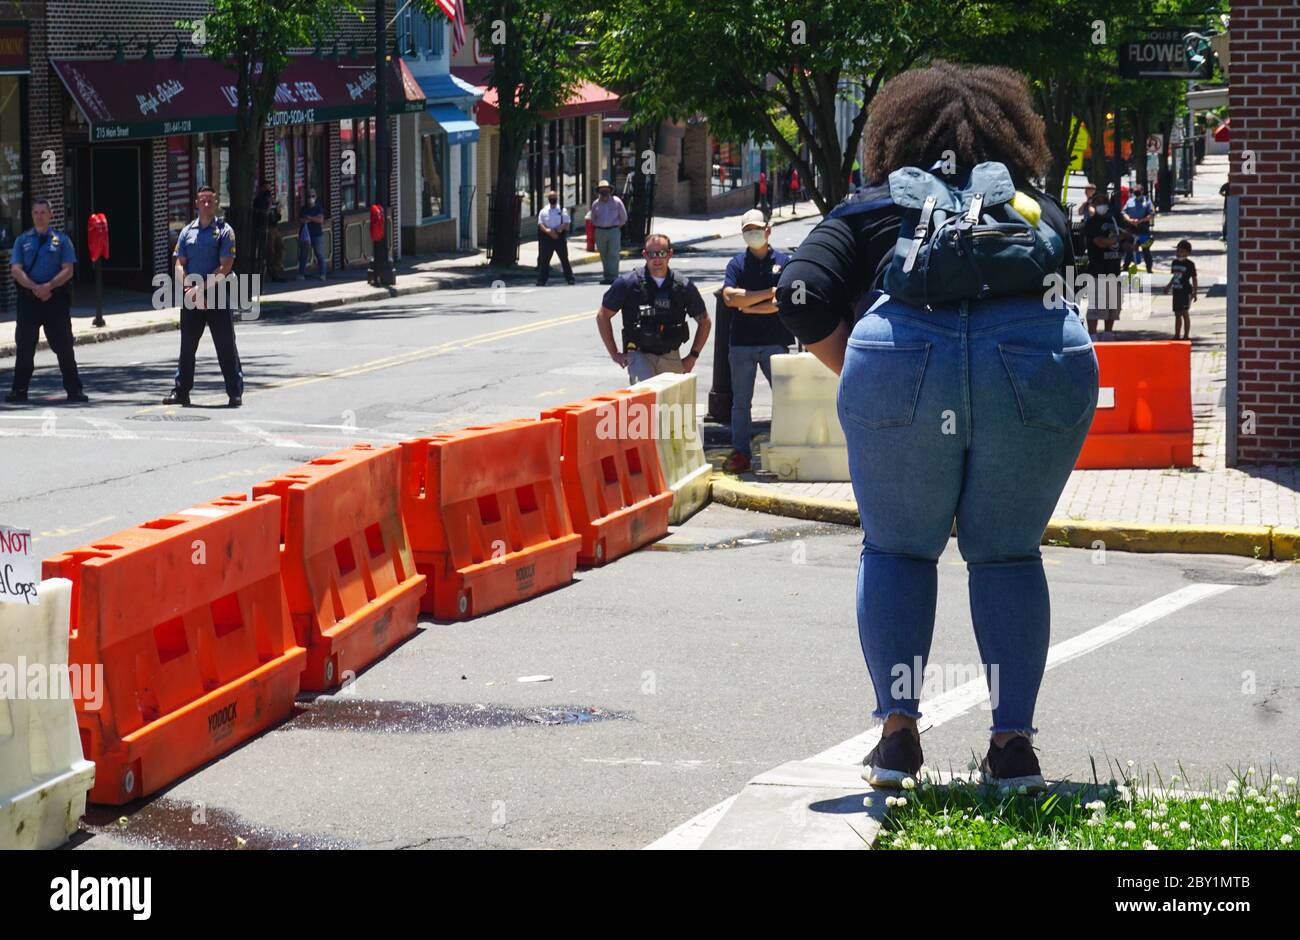 Black Woman Screaming at Ridgefield Park Police Officers at Black Lives Matter George Floyd Protest - ridgefield park, bergen county, new jersey, usa Stock Photo